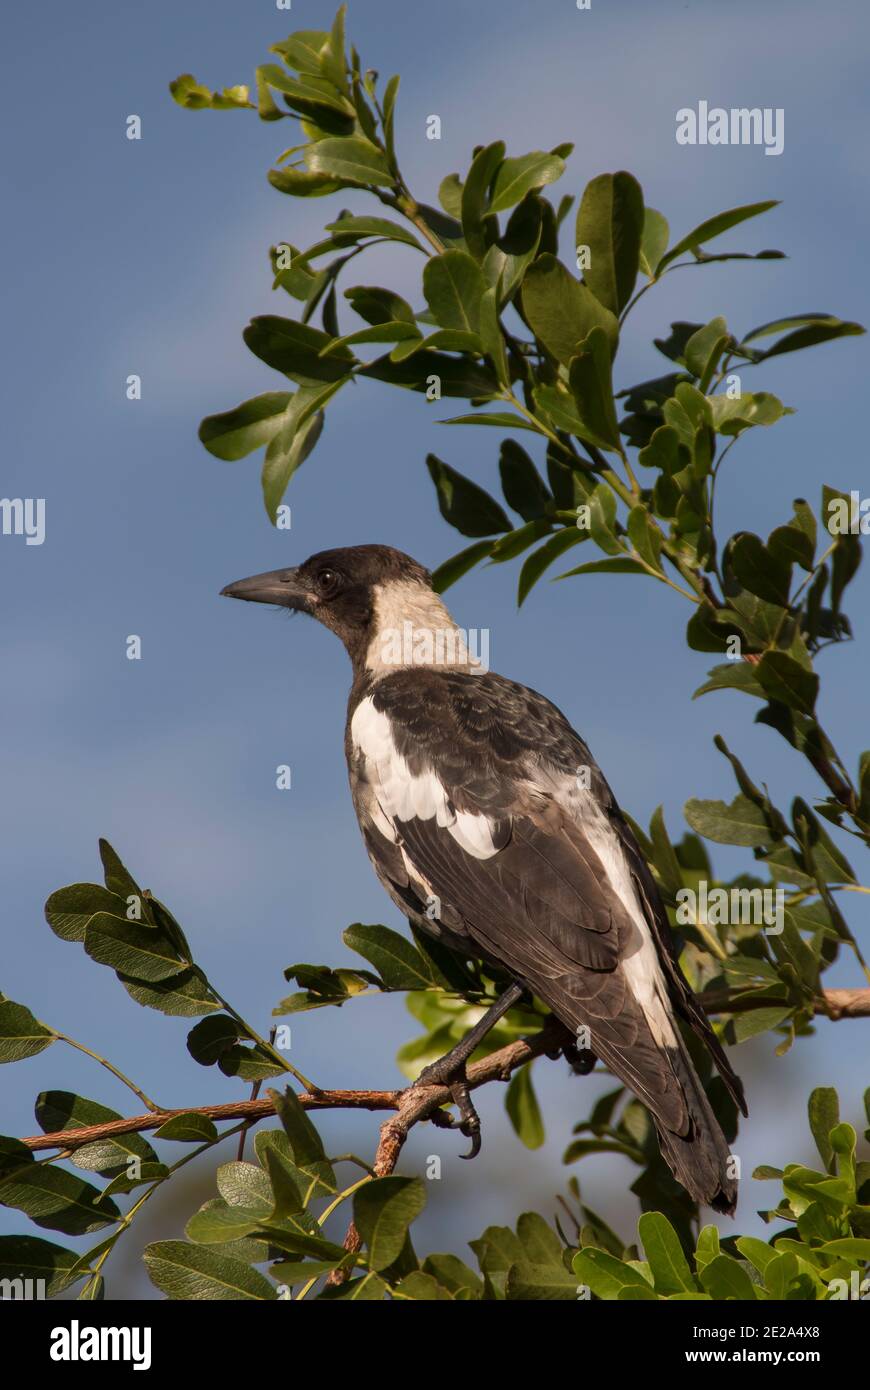 A profile of an Australian magpie (cracticus tibicen) perched in a tree with green leaves, against a blue sky. Summer in a Queensland garden. Stock Photo